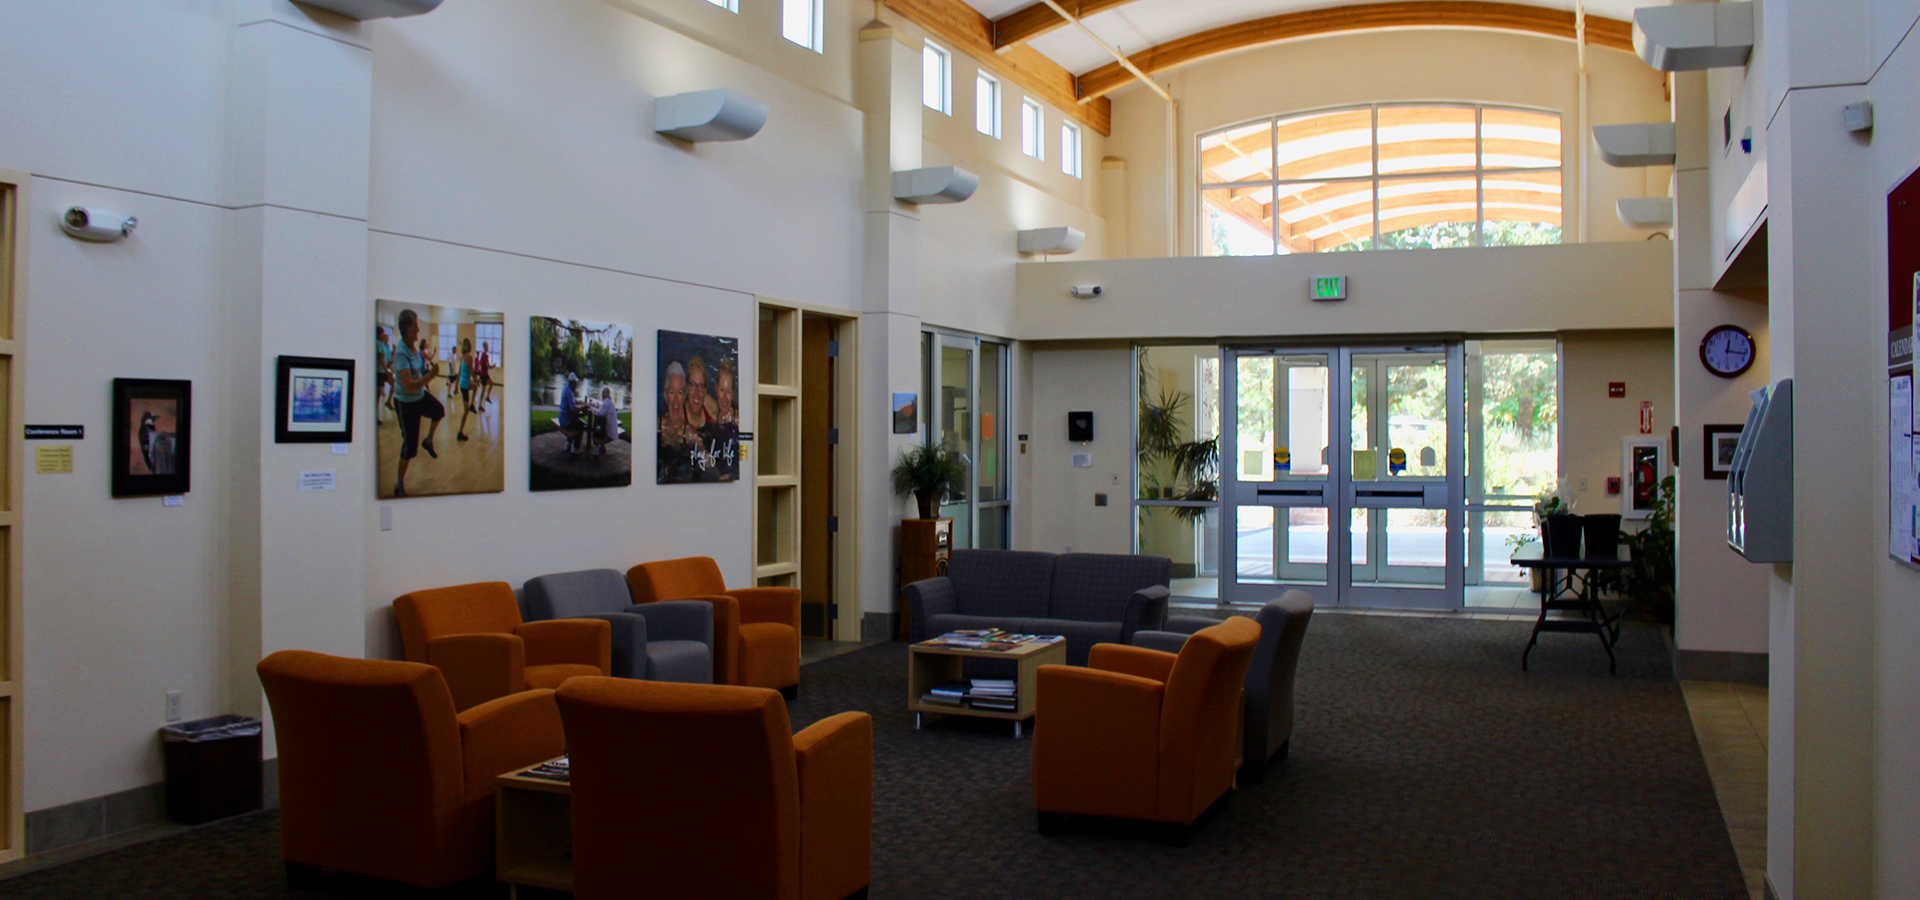 The Bend Senior Center lobby and entrance.